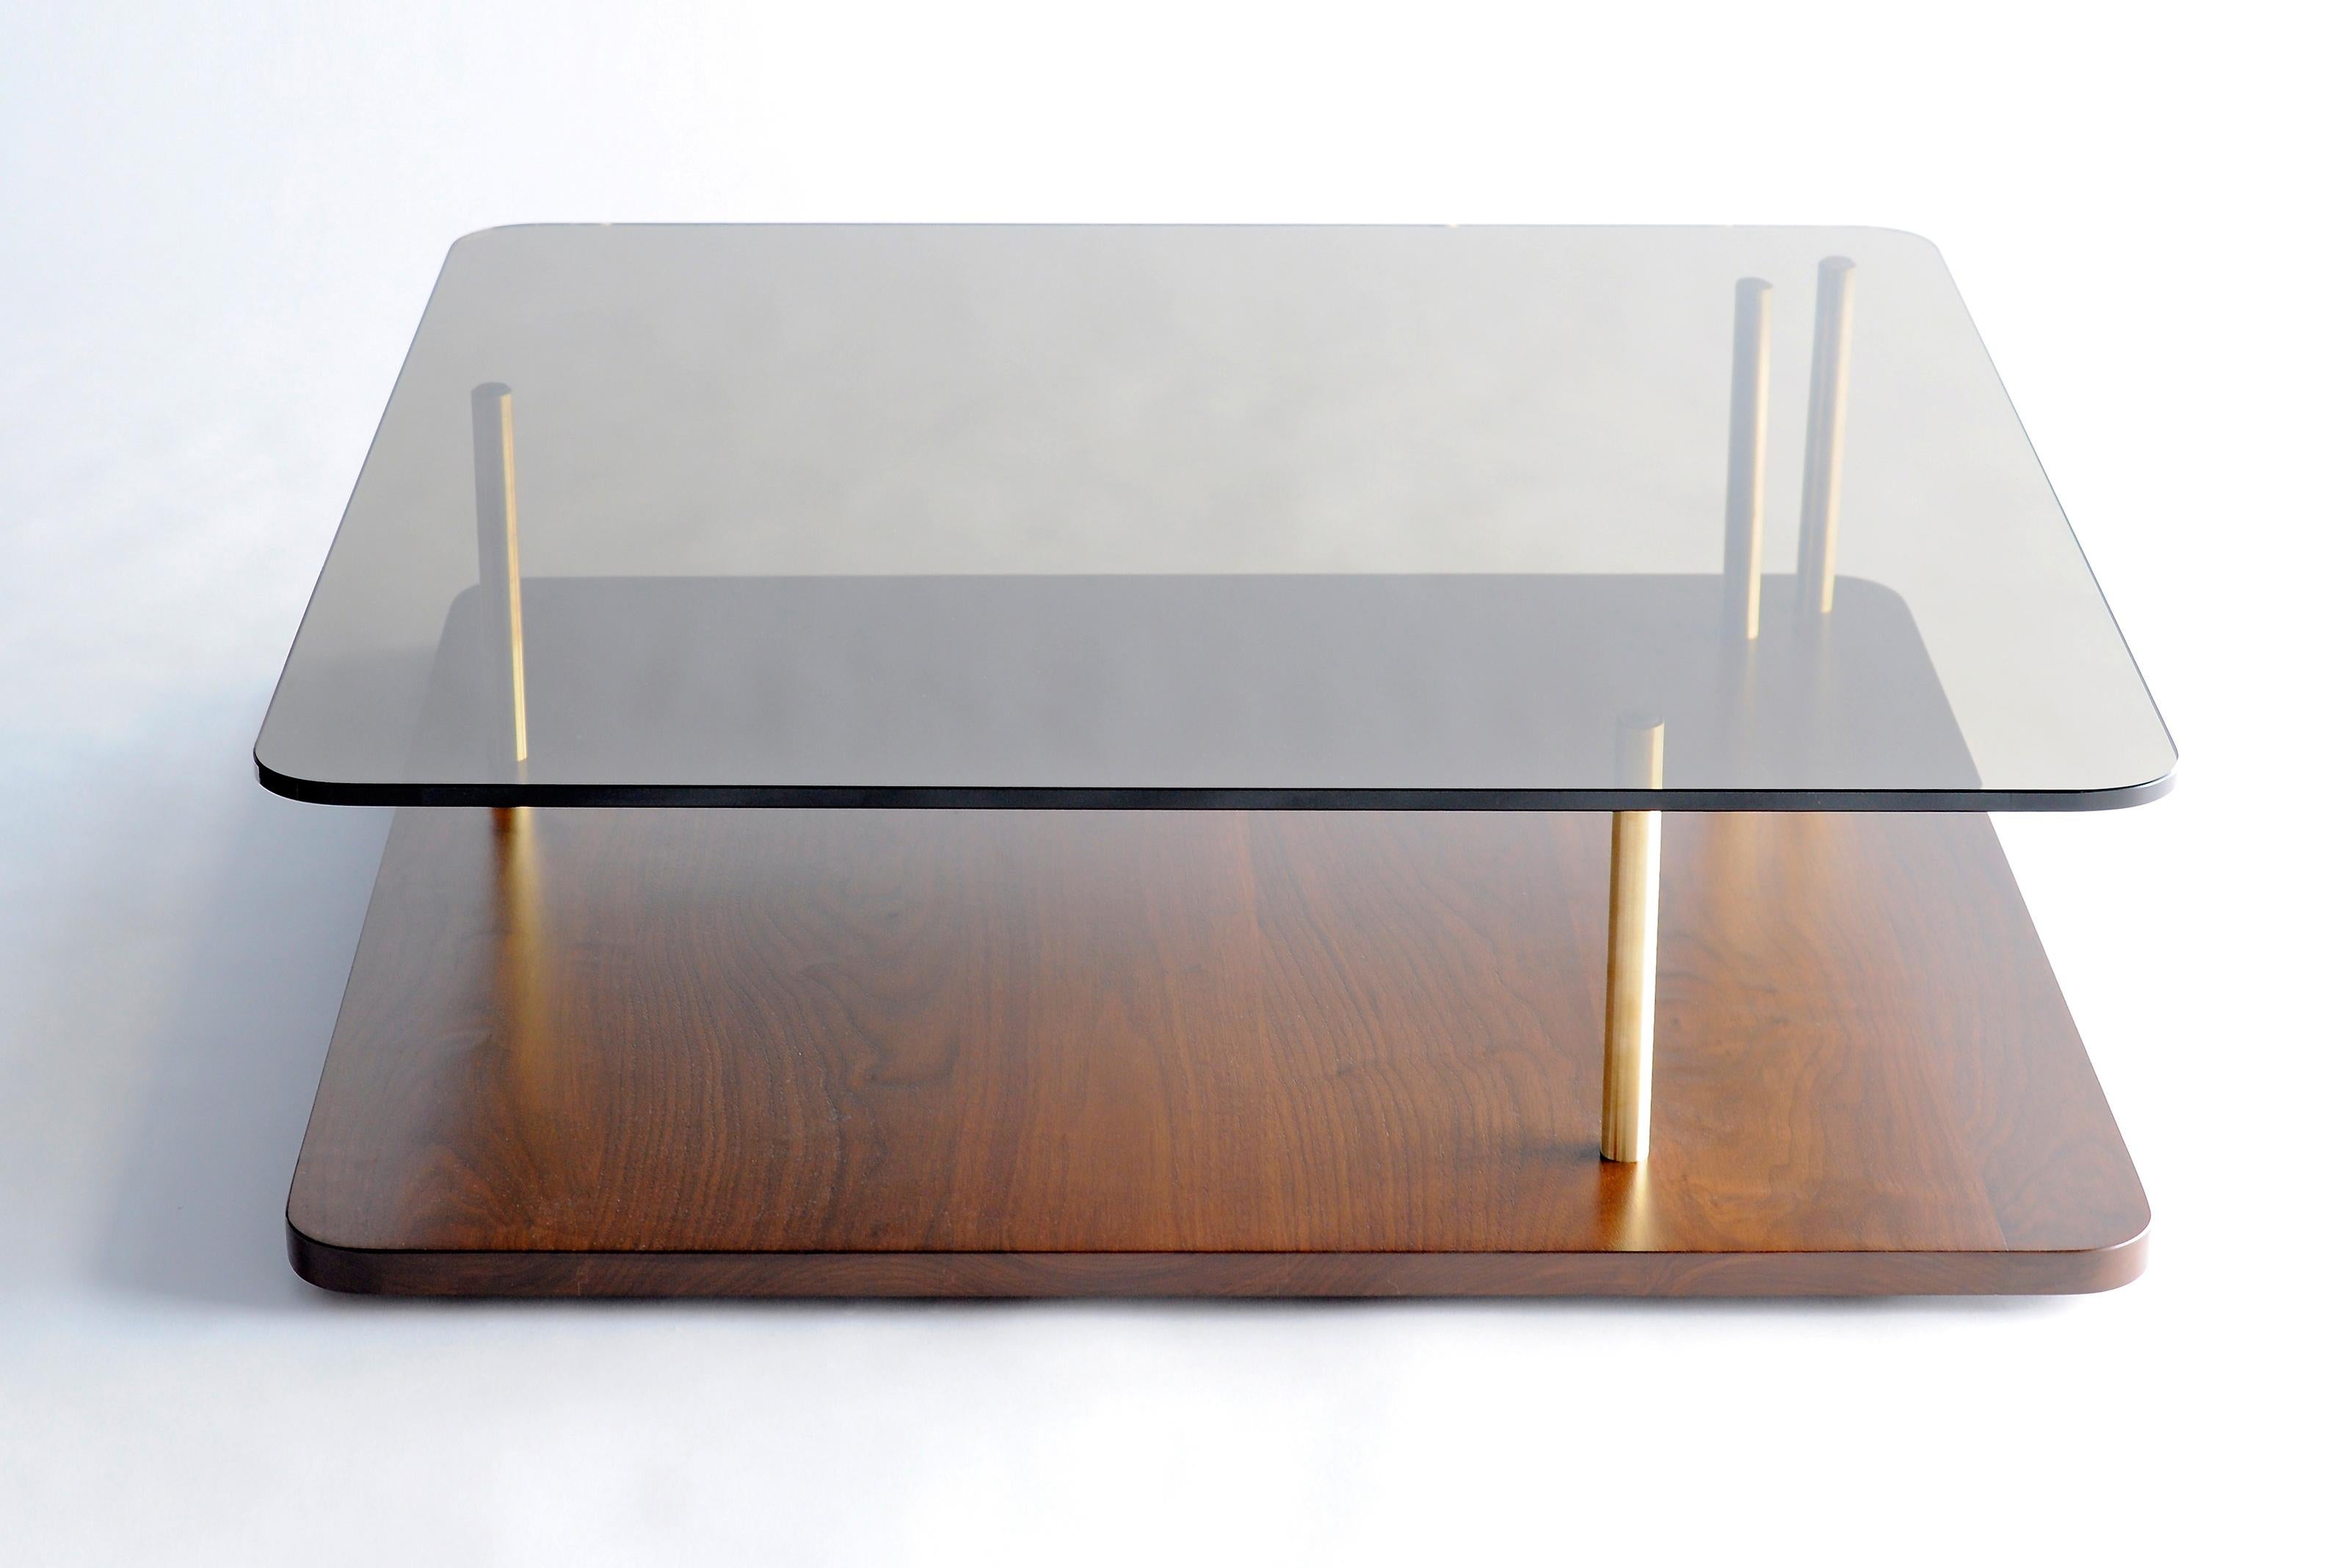 Points of Interest Square Coffee Table by Phase Design
Dimensions: D 96.5 x W 96.5 x H 29.2 cm. 
Materials: Walnut, glass and brass.

Solid wooden base is available in walnut, white oak, and ebonized oak. Support columns are available in solid